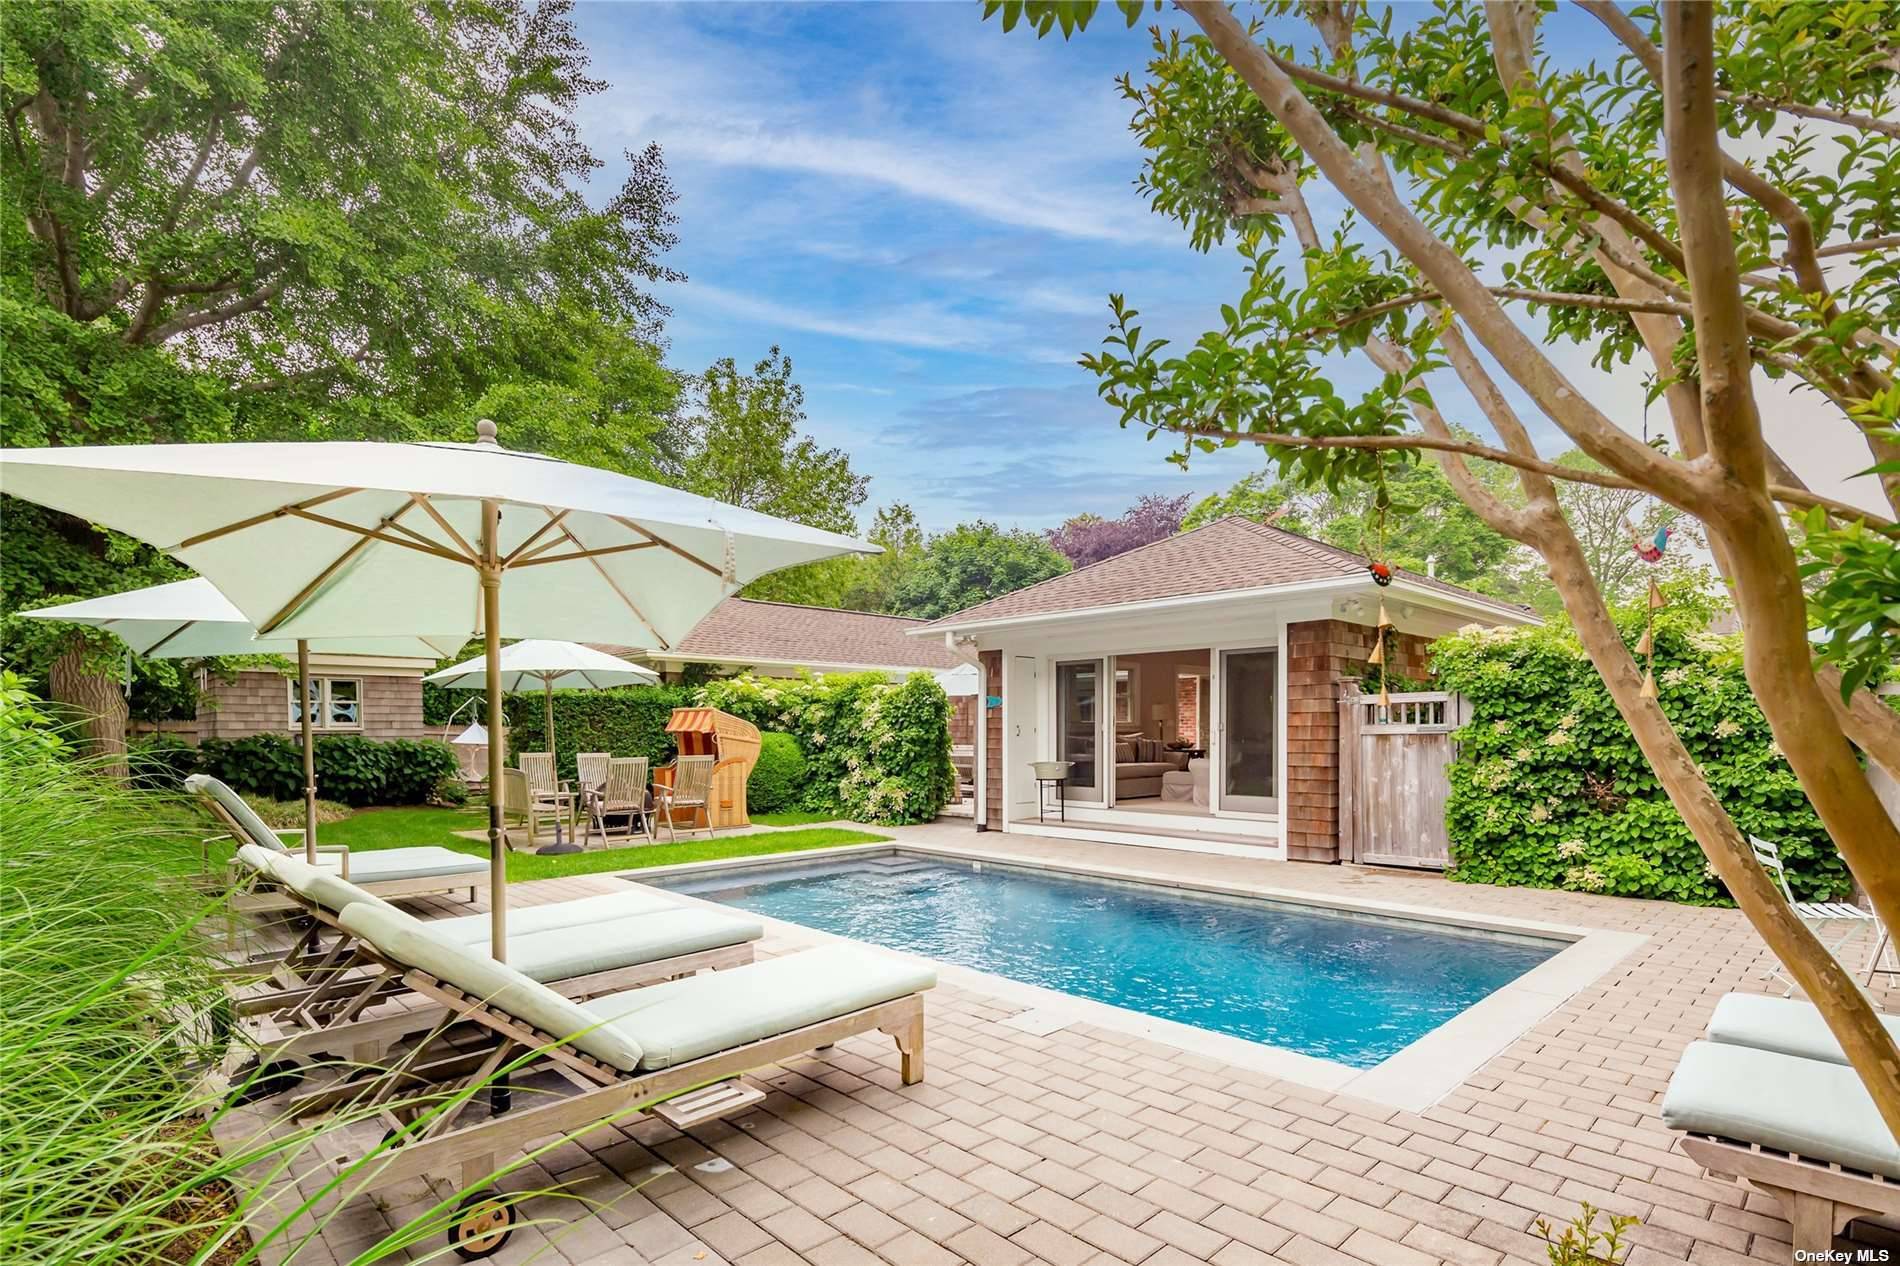 This updated and charming Hamptons ranch offers nearly 2100 square feet of turn key living space spread out conveniently across one level.